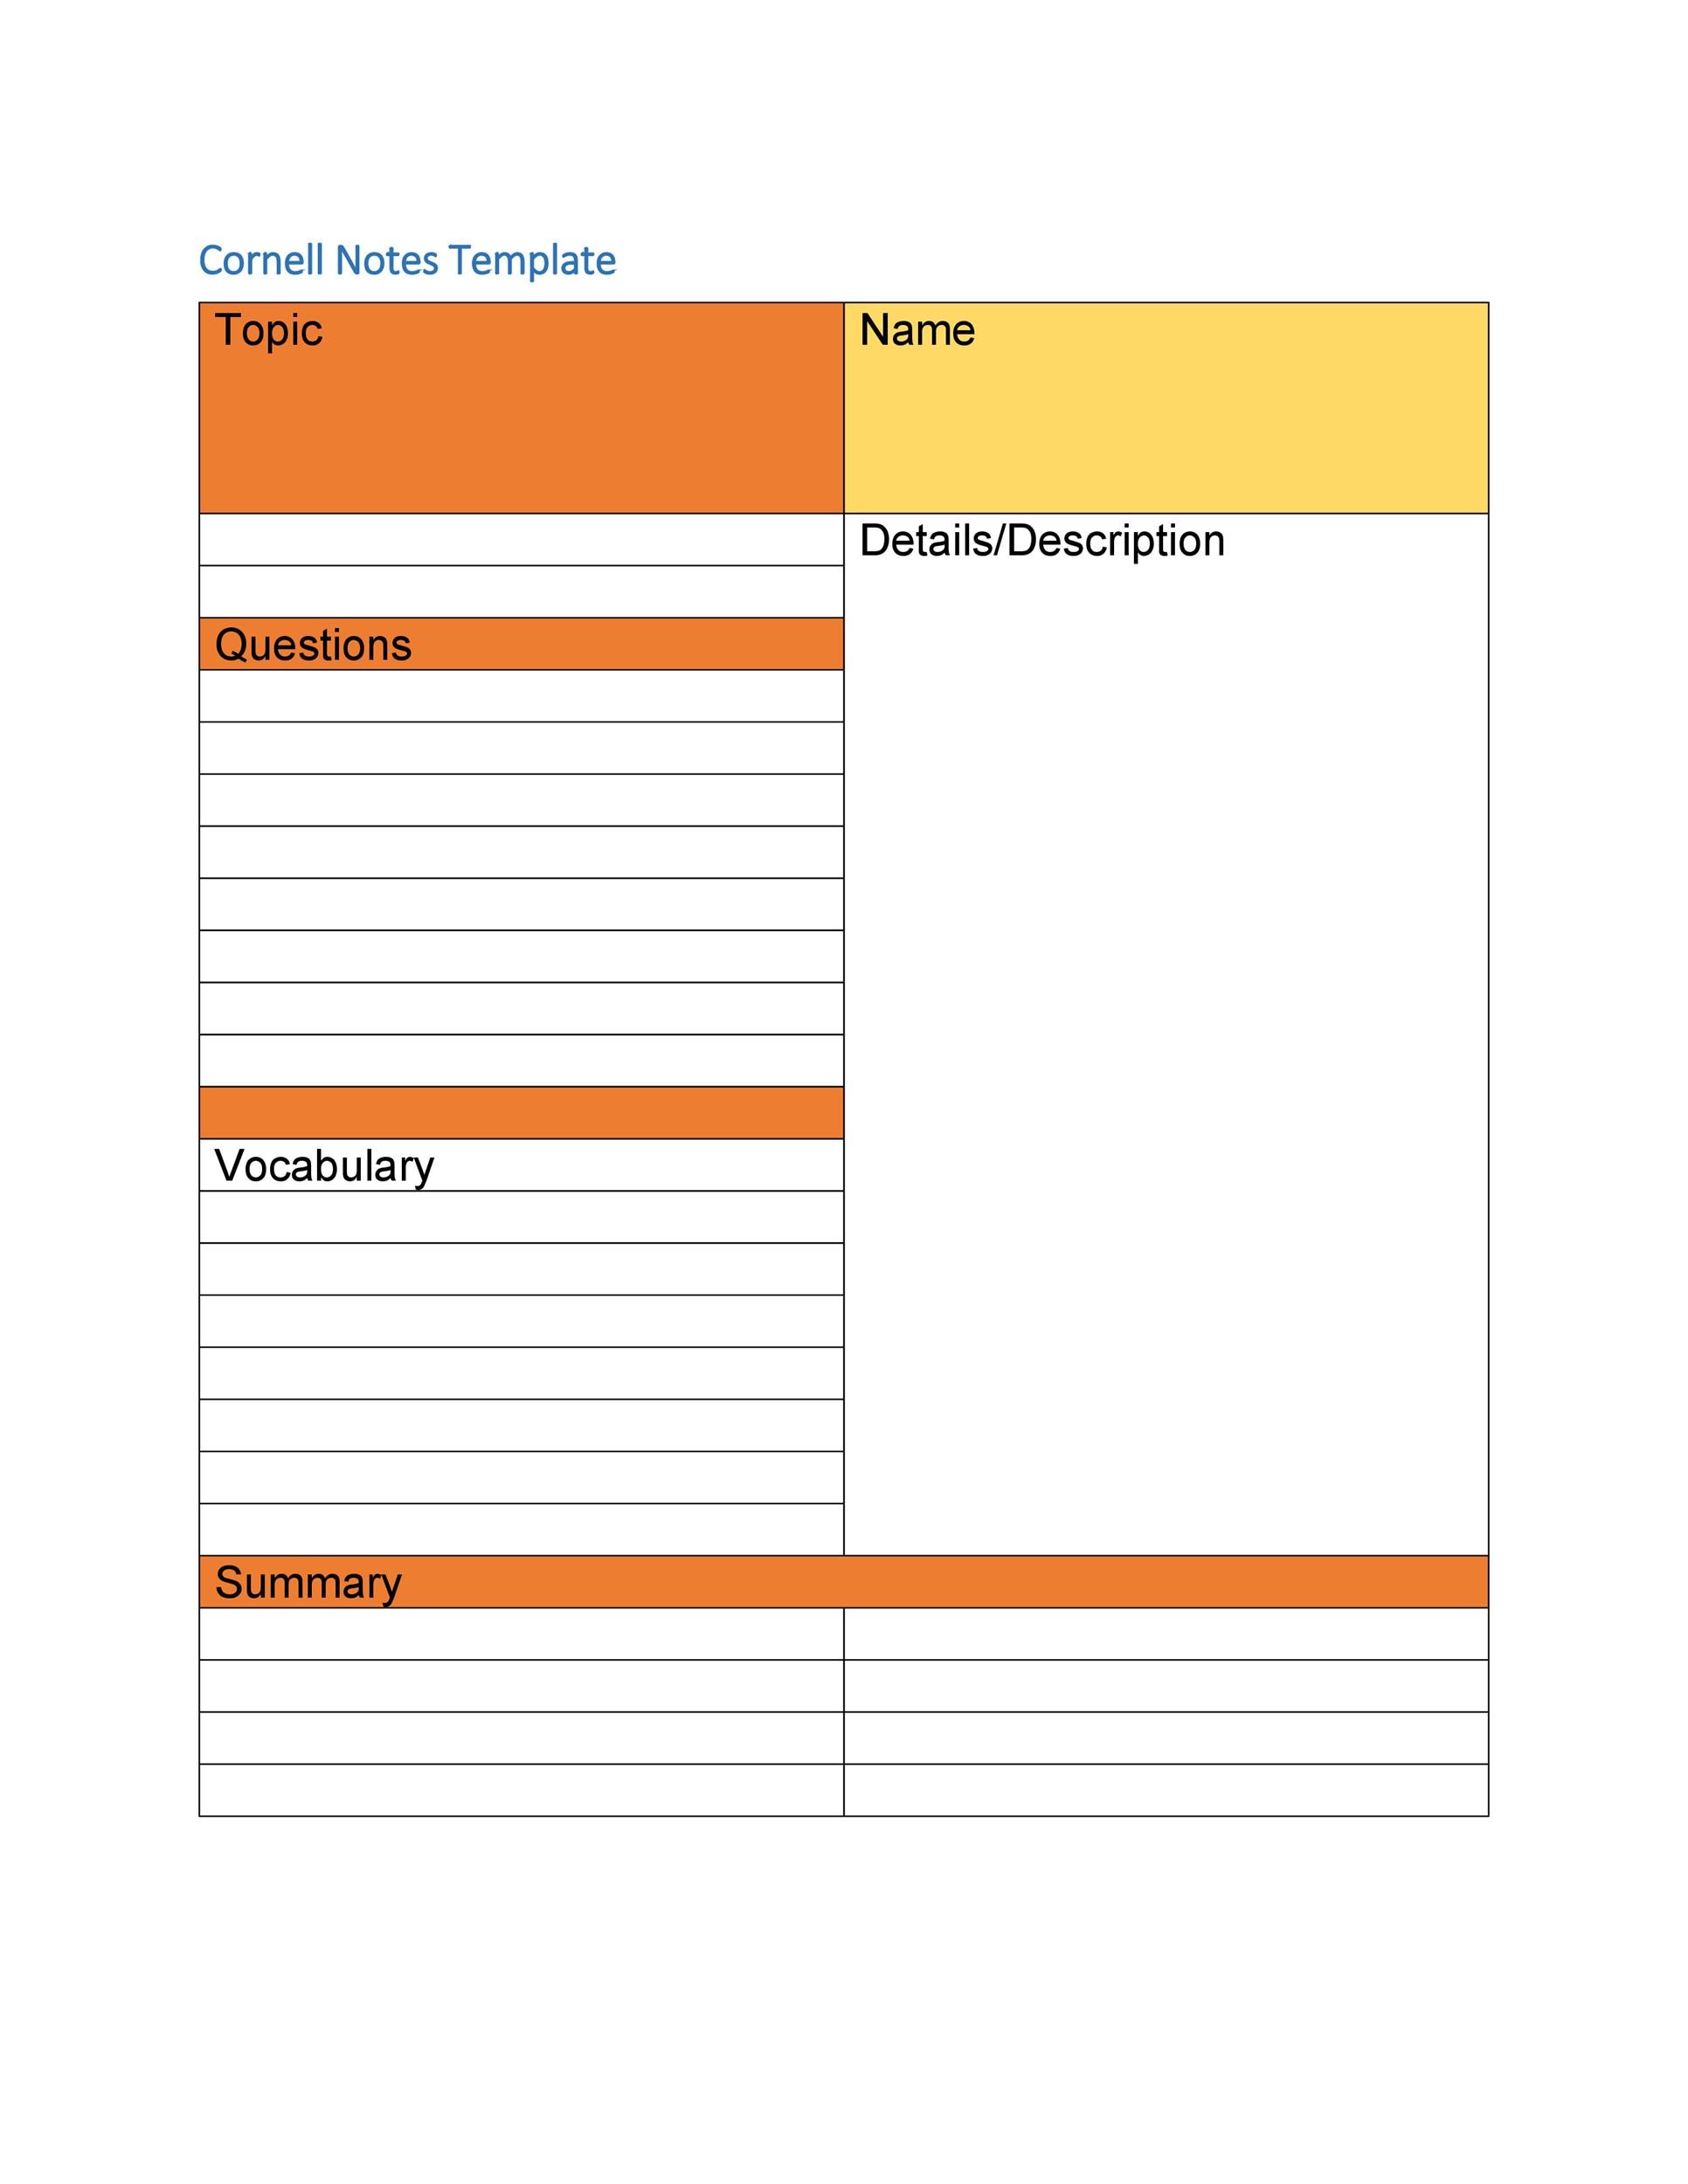 Free Cornell Notes Template 06